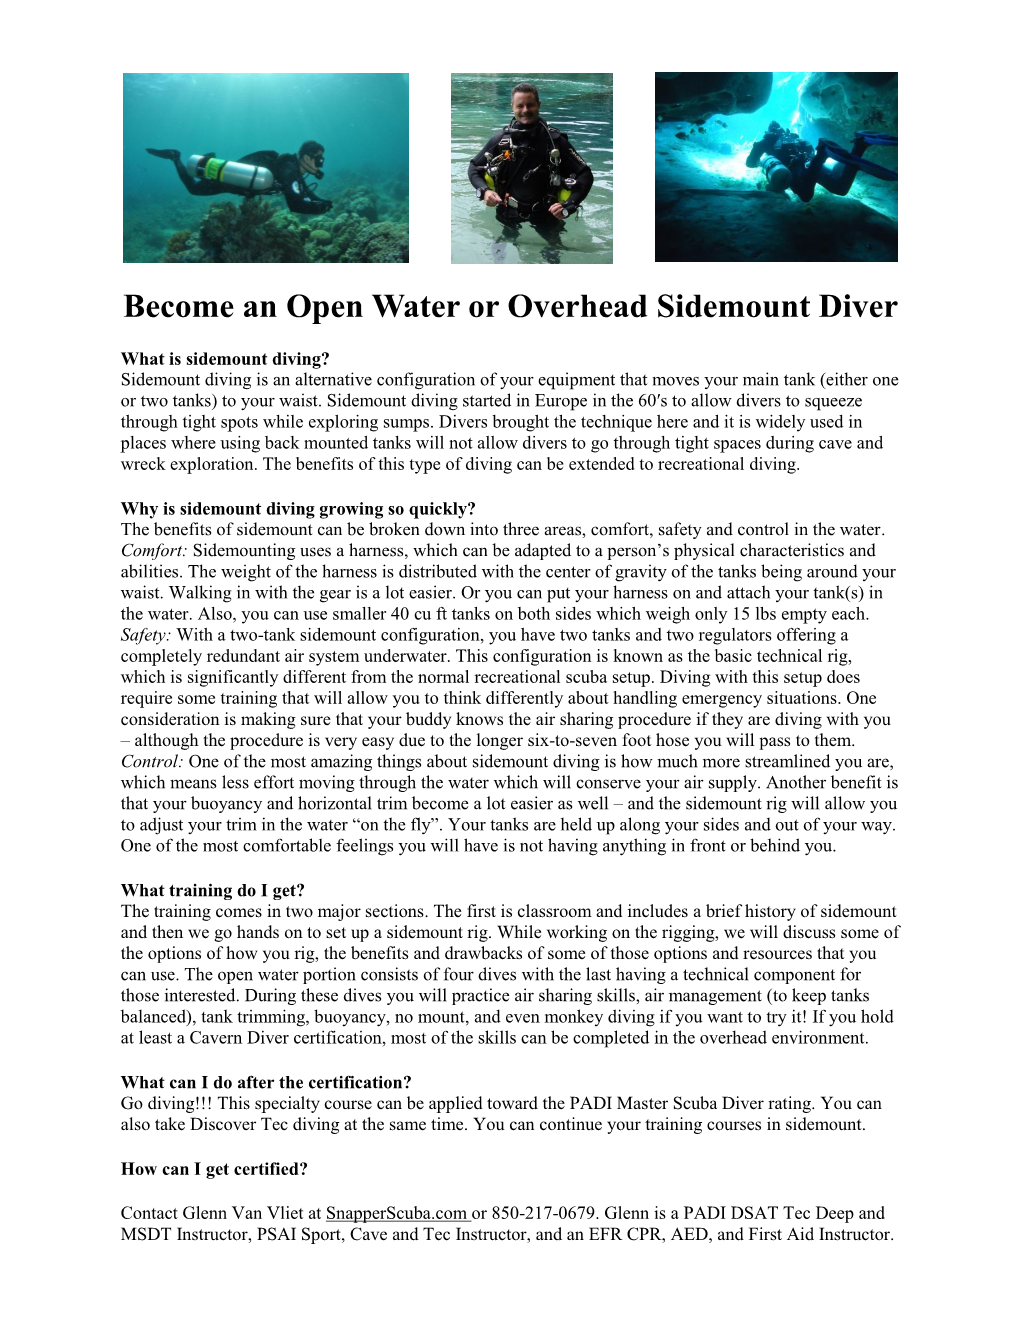 Become an Open Water Or Overhead Sidemount Diver